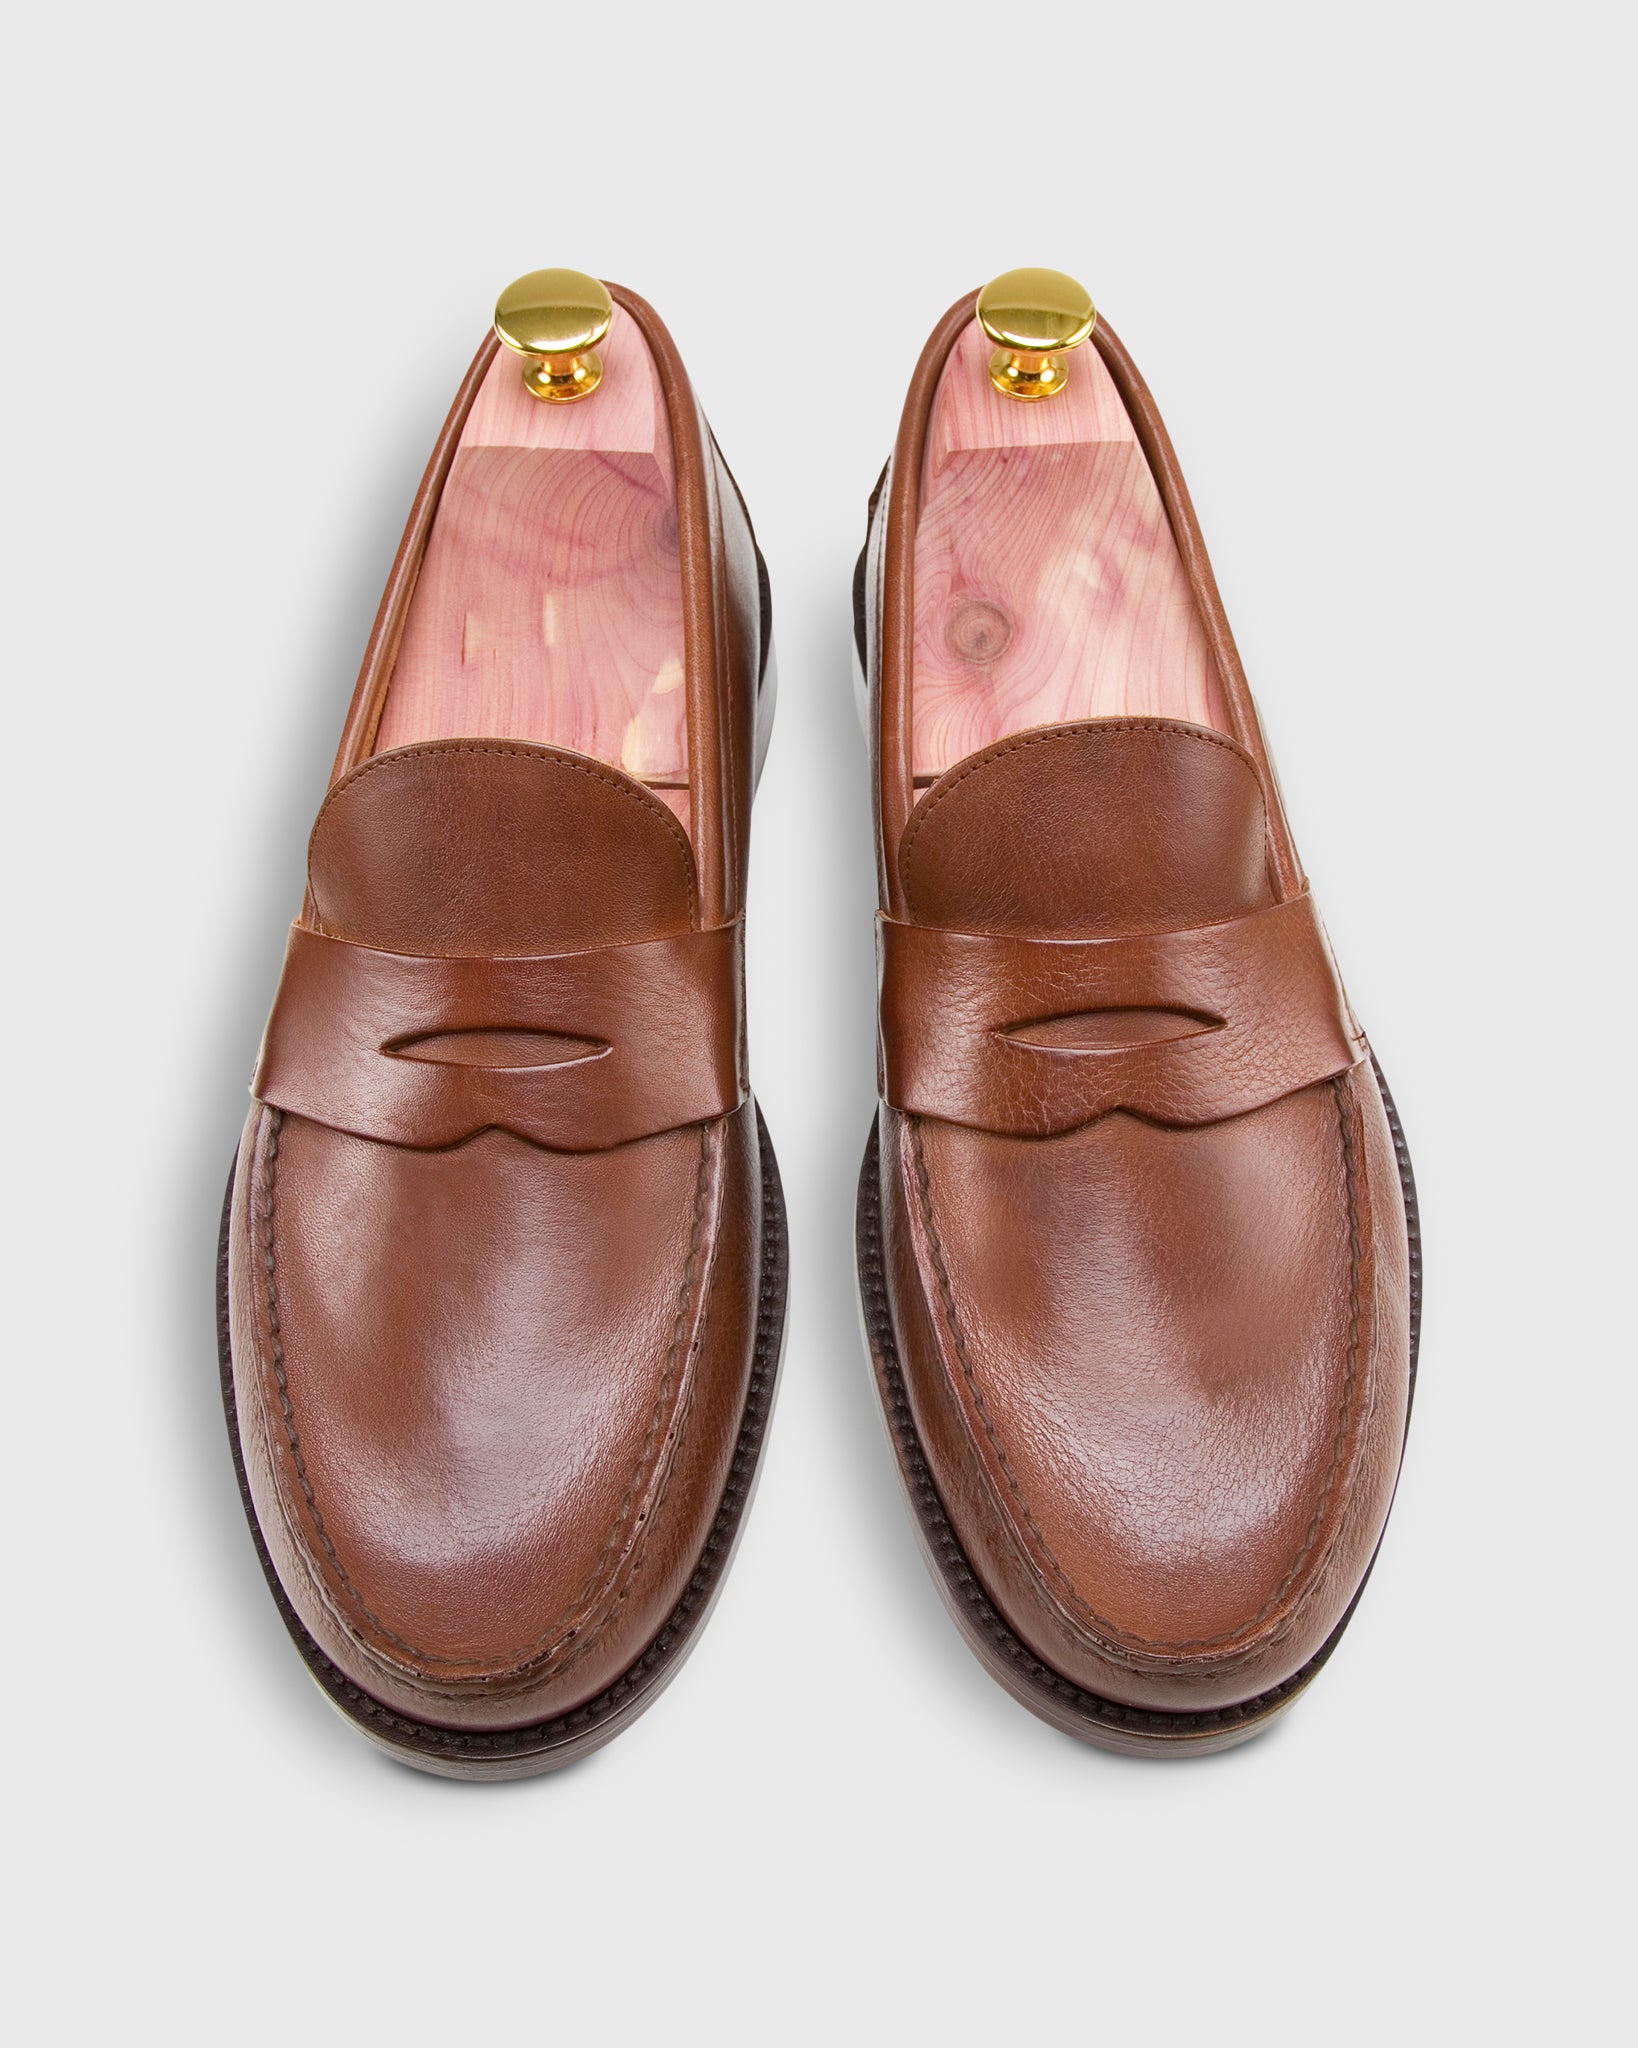 Handsewn Penny Loafer BOURBON GRAIN LEATHER